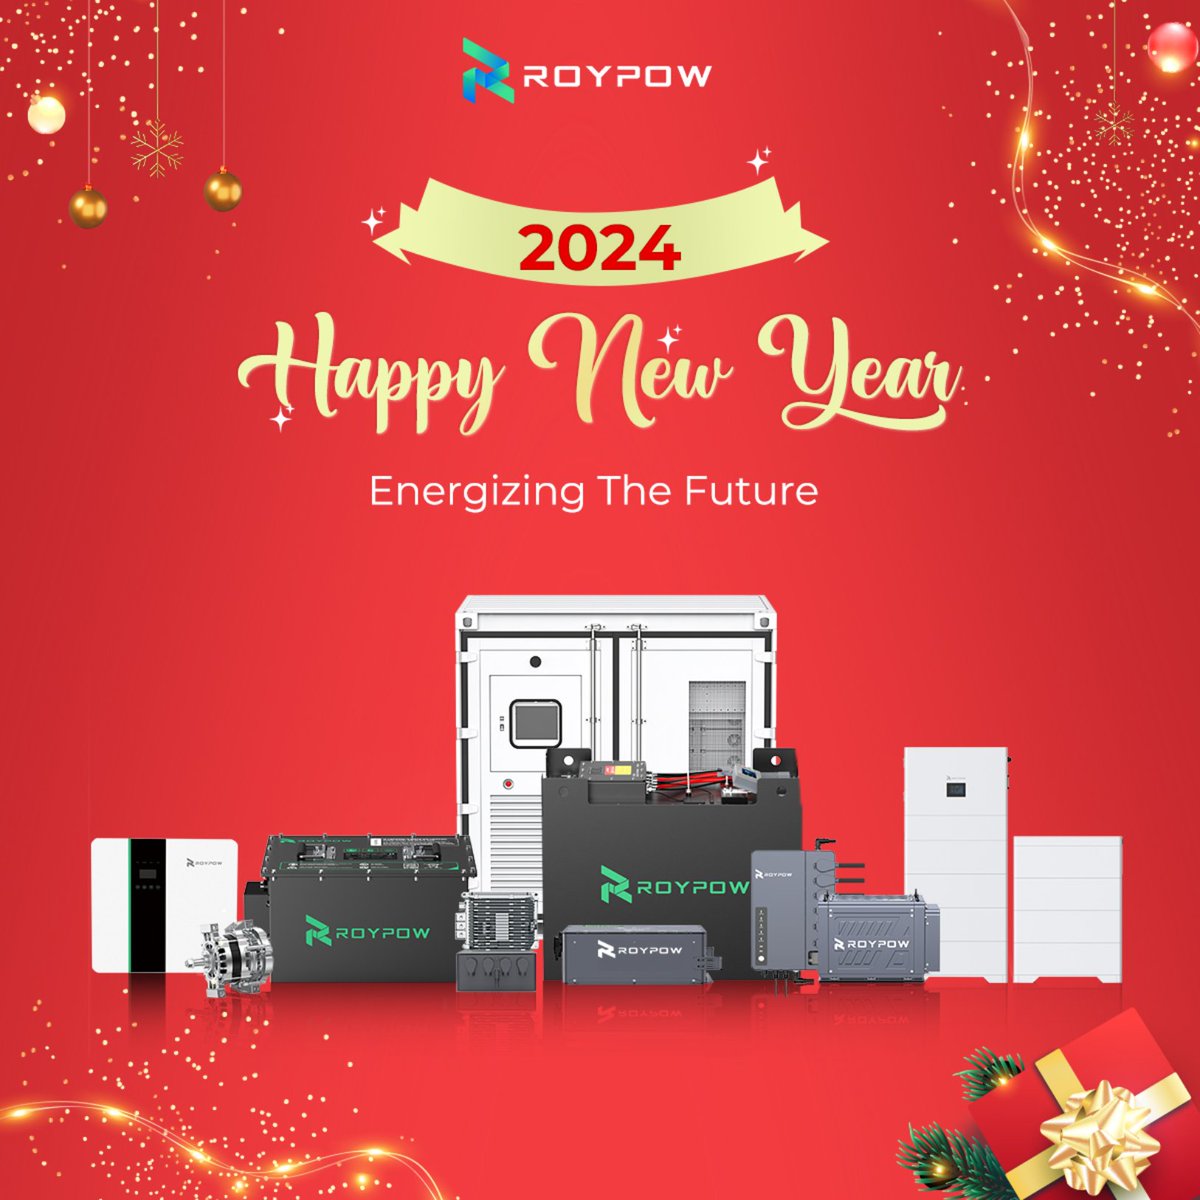 🍃Charging into 2024 with power, purpose, and endless possibilities. Wishing you a bright New Year filled with energy and success! 🌟

#ROYPOW #ROYPOWlithium #SustainablePower #HappyNewYear #NewYearNewPower